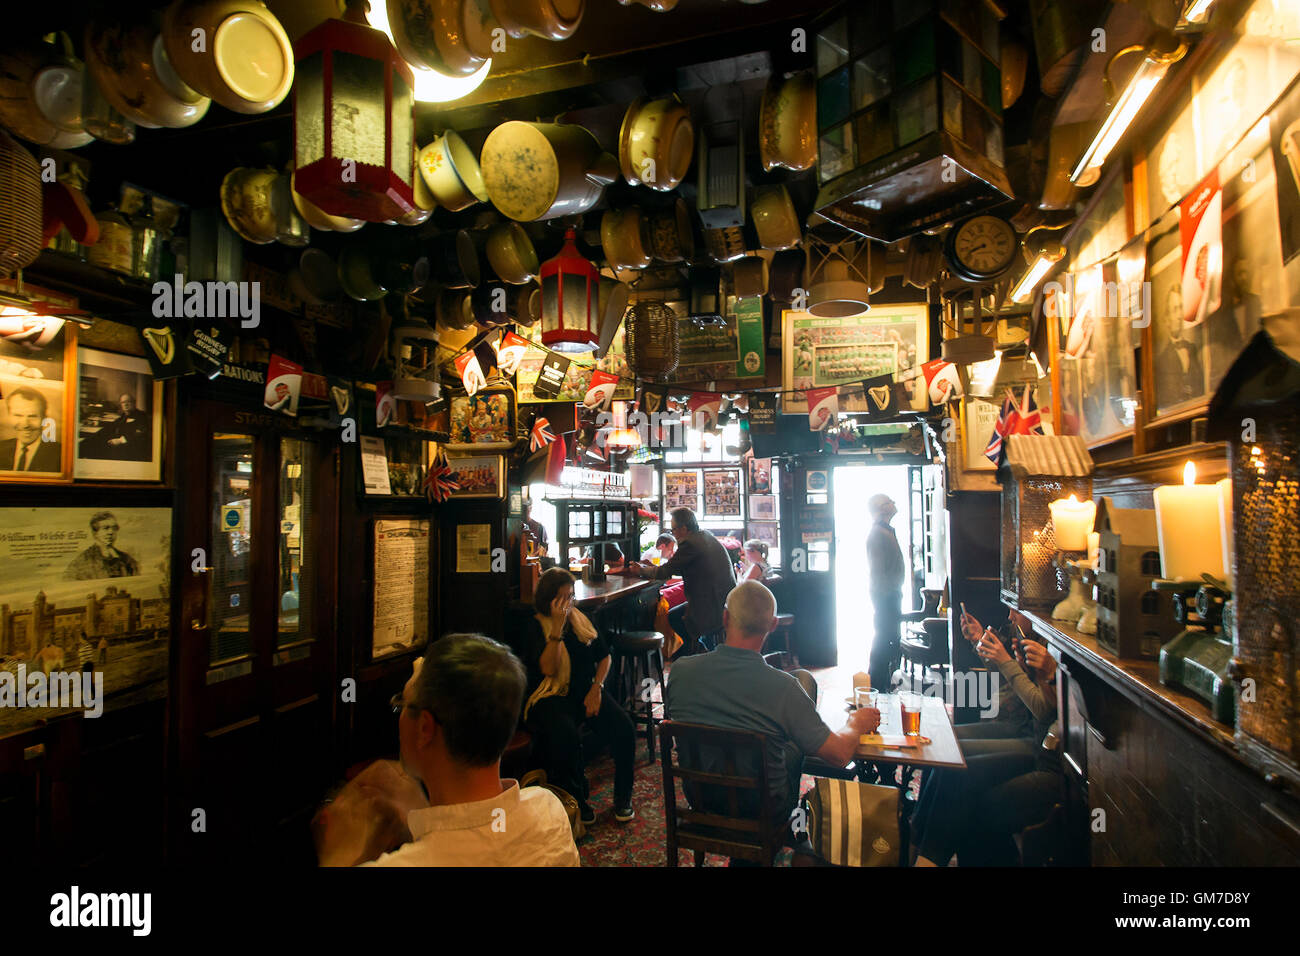 London, UK - May 7, 2016: Inside view of a public house, known as pub, for drinking and socializing, is the focal point of the c Stock Photo